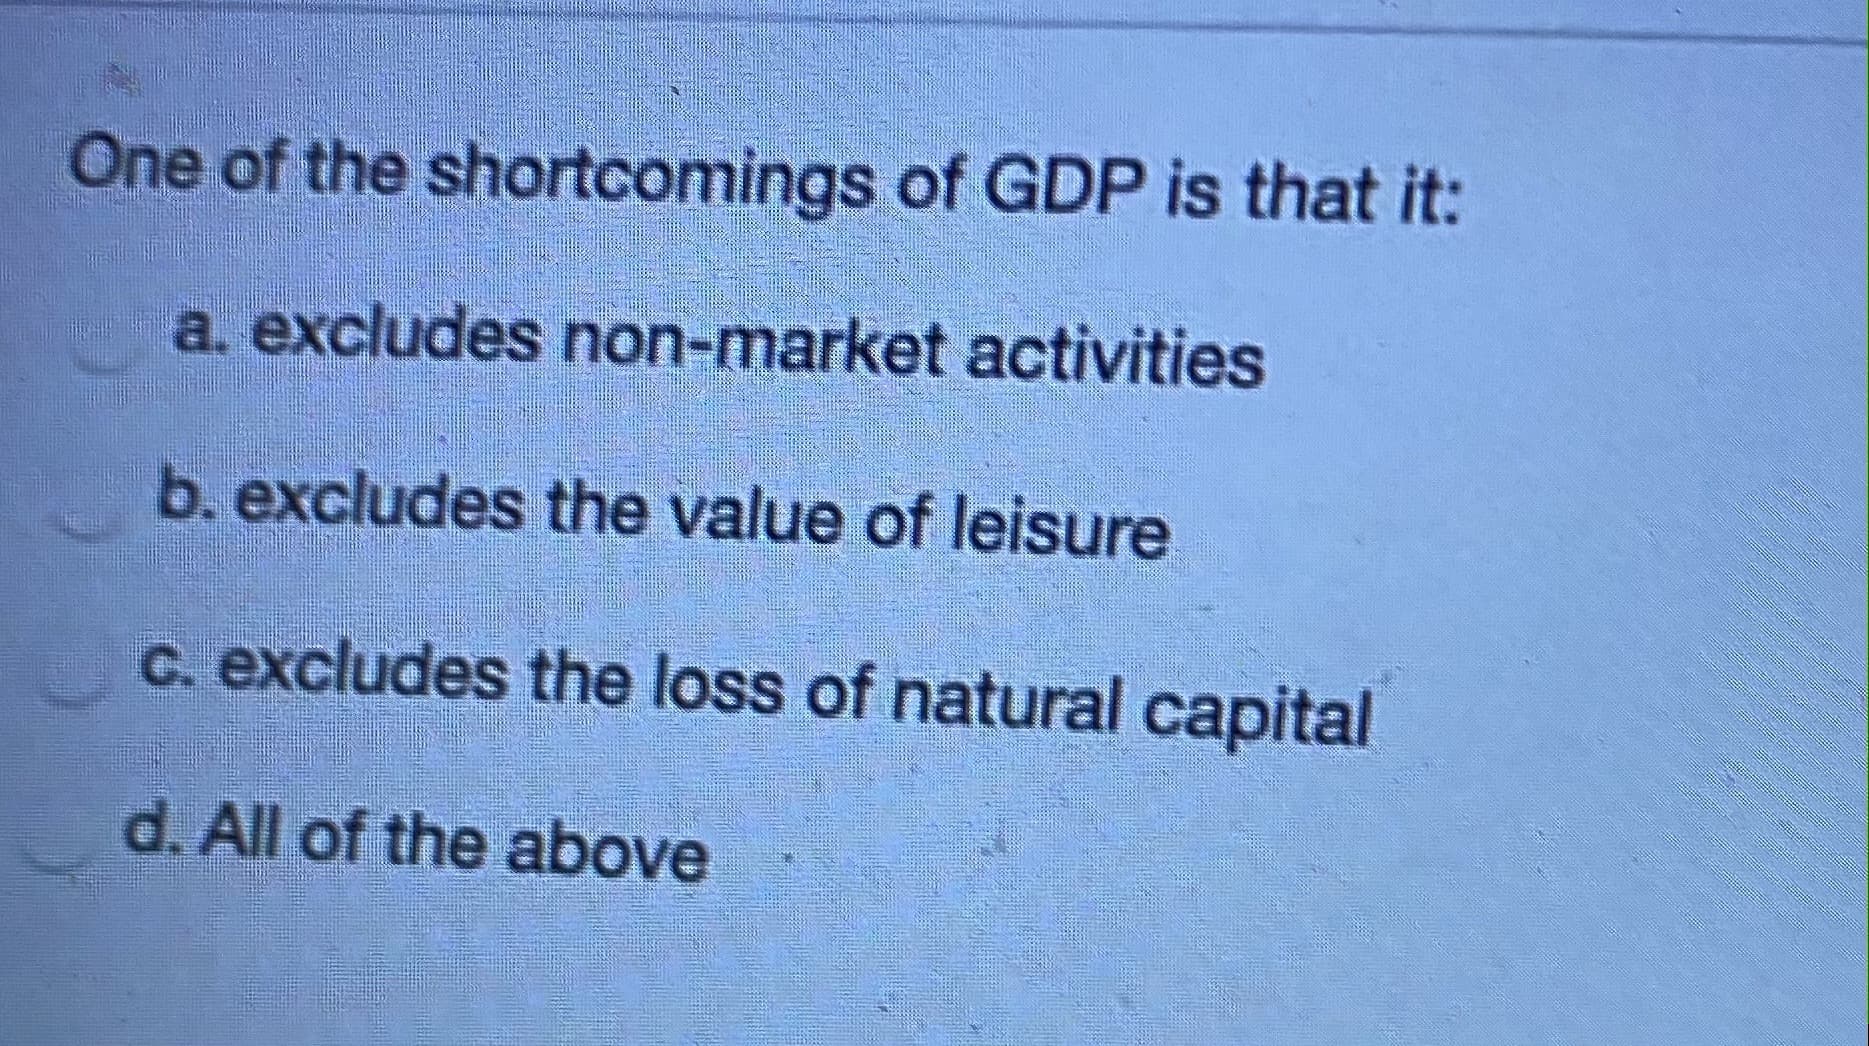 One of the shortcomings of GDP is that it:
a. excludes non-market activities
b. excludes the value of leisure
C. excludes the loss of natural capital
d. All of the above
